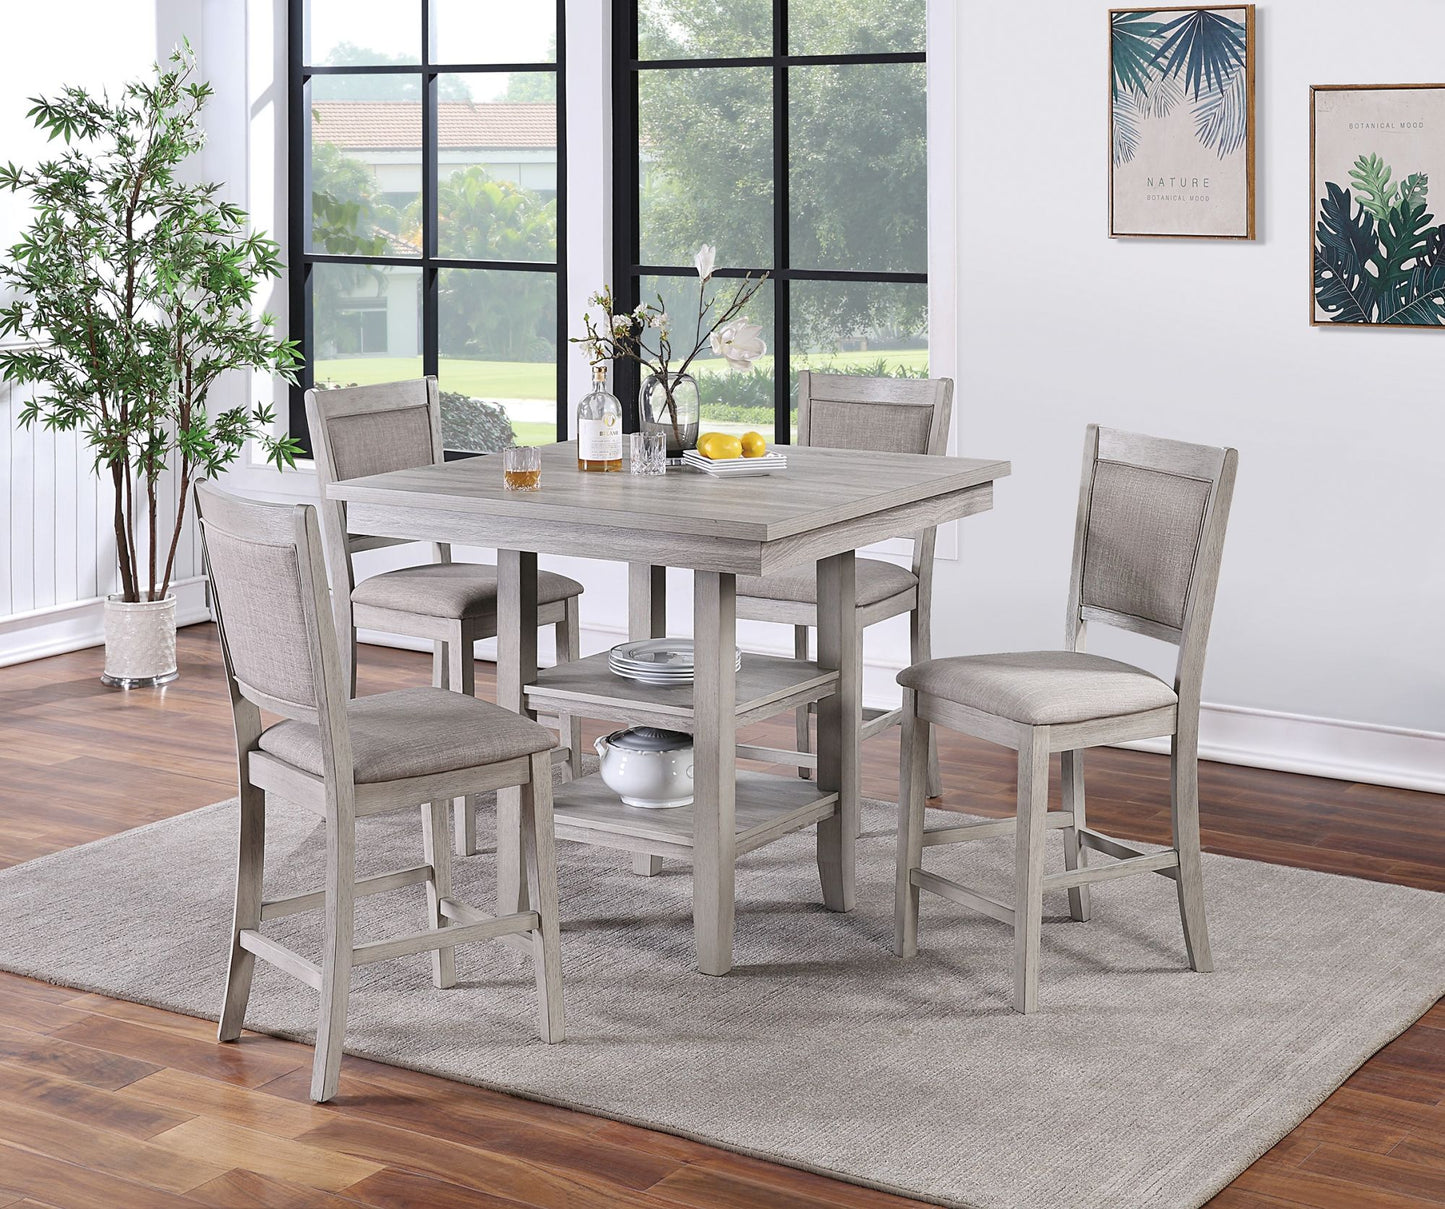 Dining Room Furniture Counter Height 5pc Set Square Table w Shelves Cushion Chairs Modern Contemporary Style Home Decor by Design